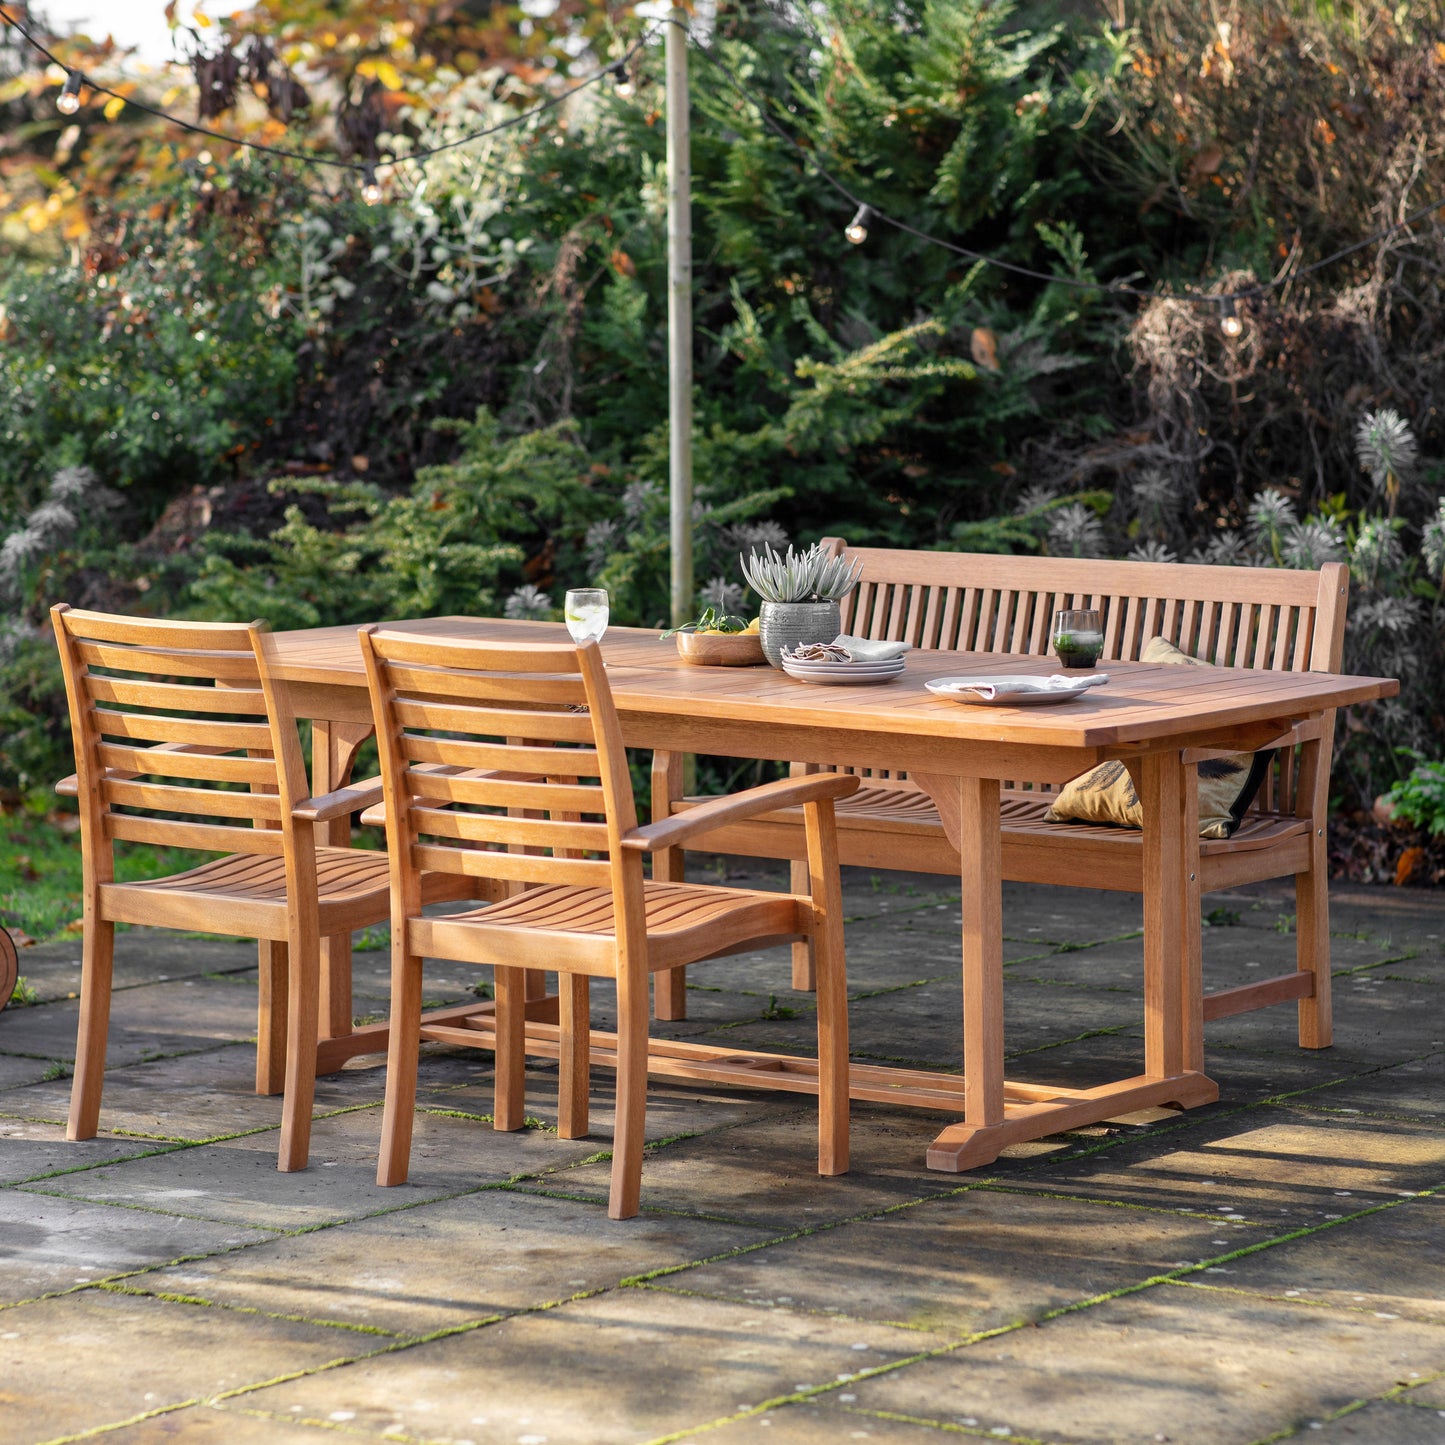 A Cornworthy Outdoor Ext Dining Table and chairs in a garden by Kikiathome.co.uk, ideal for interior decor and home furniture.